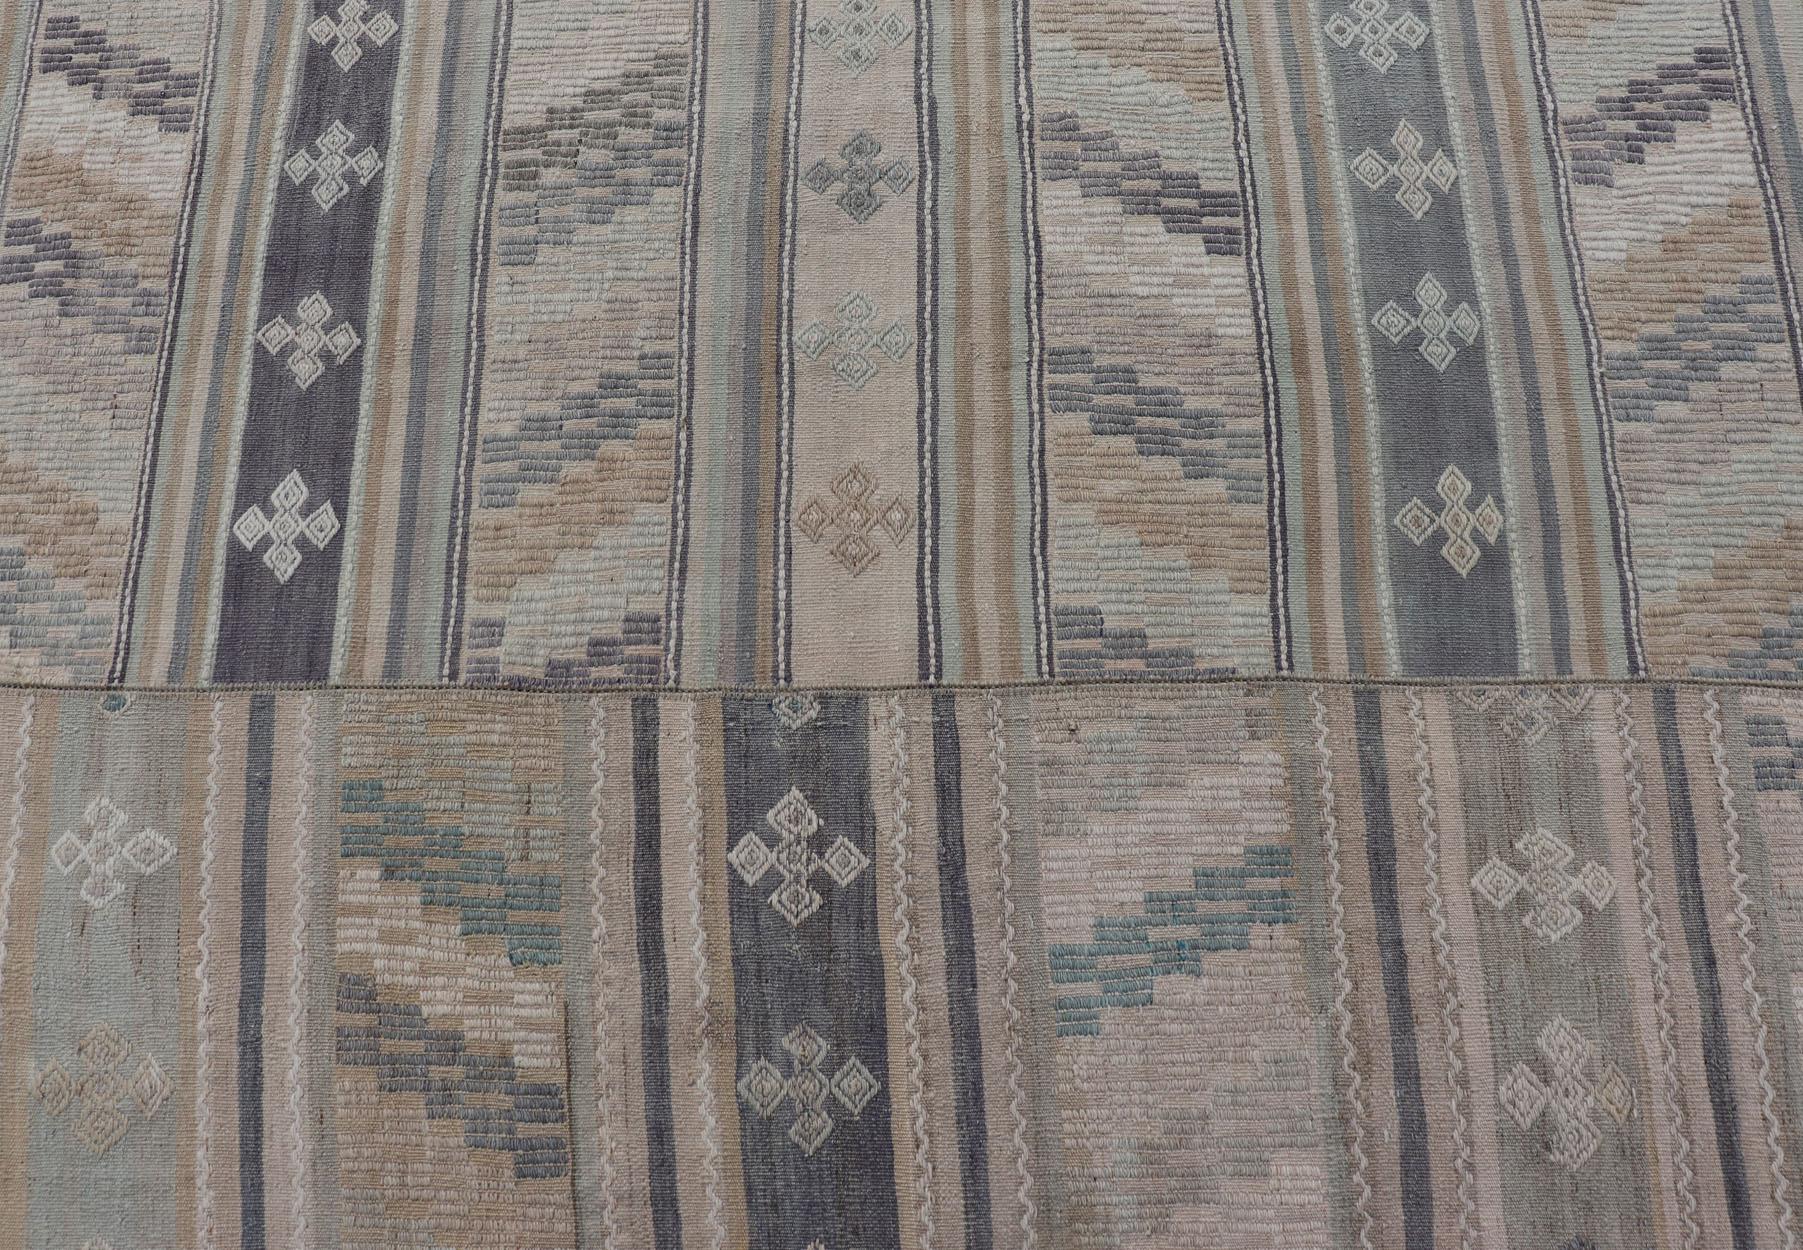 Vintage Hand Woven Turkish Paneled Kilim Vintage Rug in Muted Colors In Good Condition For Sale In Atlanta, GA